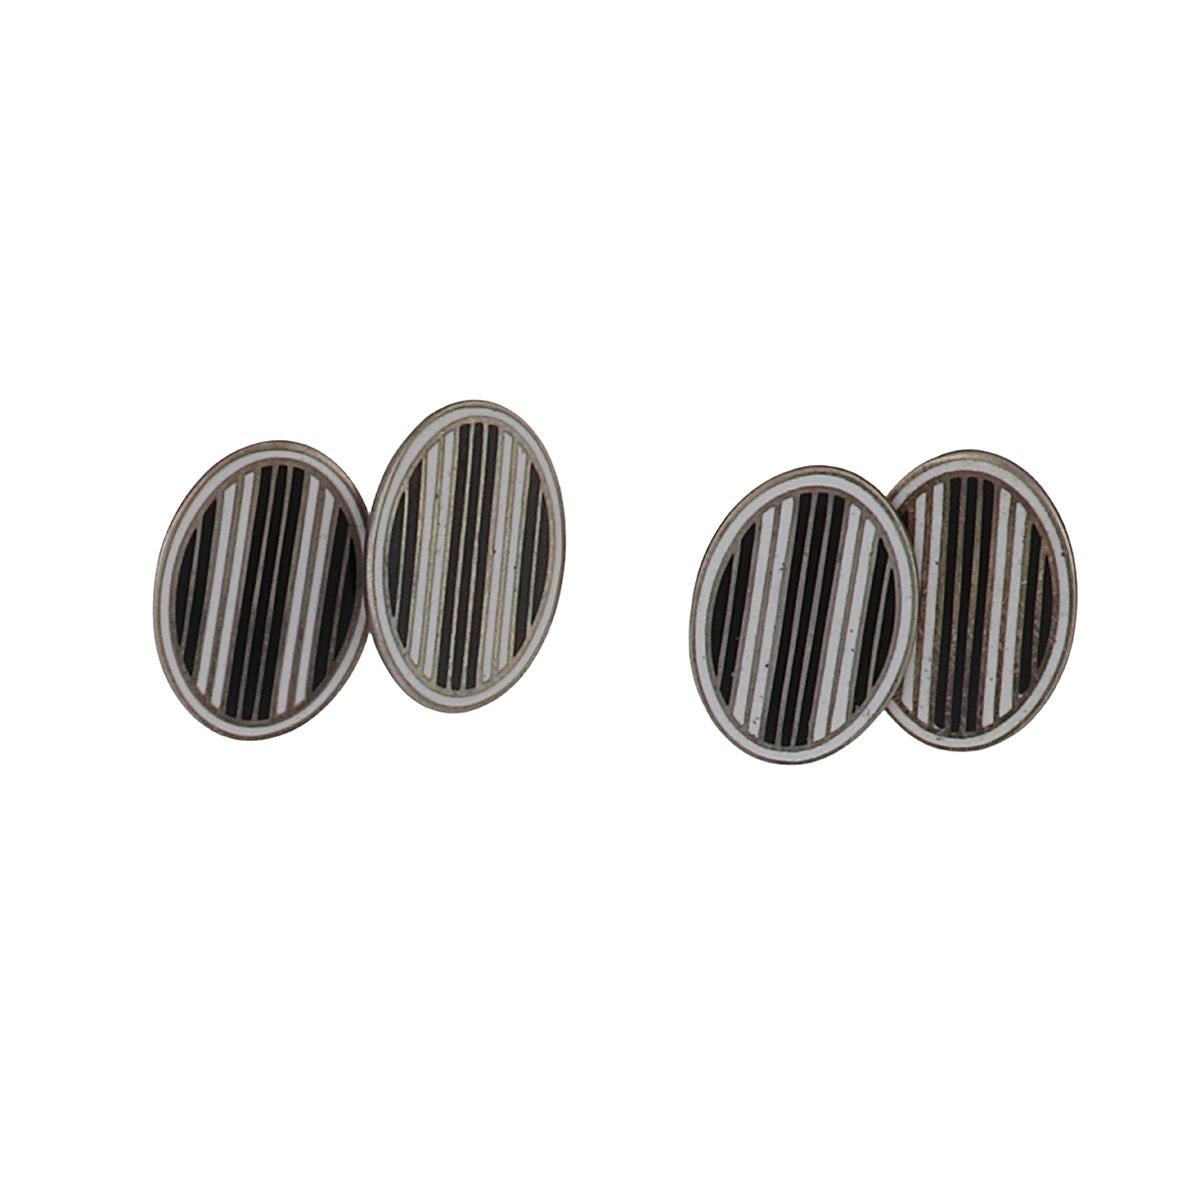 Art Deco double-sided oval shaped silver cufflinks with black and white enamel stripes. Circa 1920.
